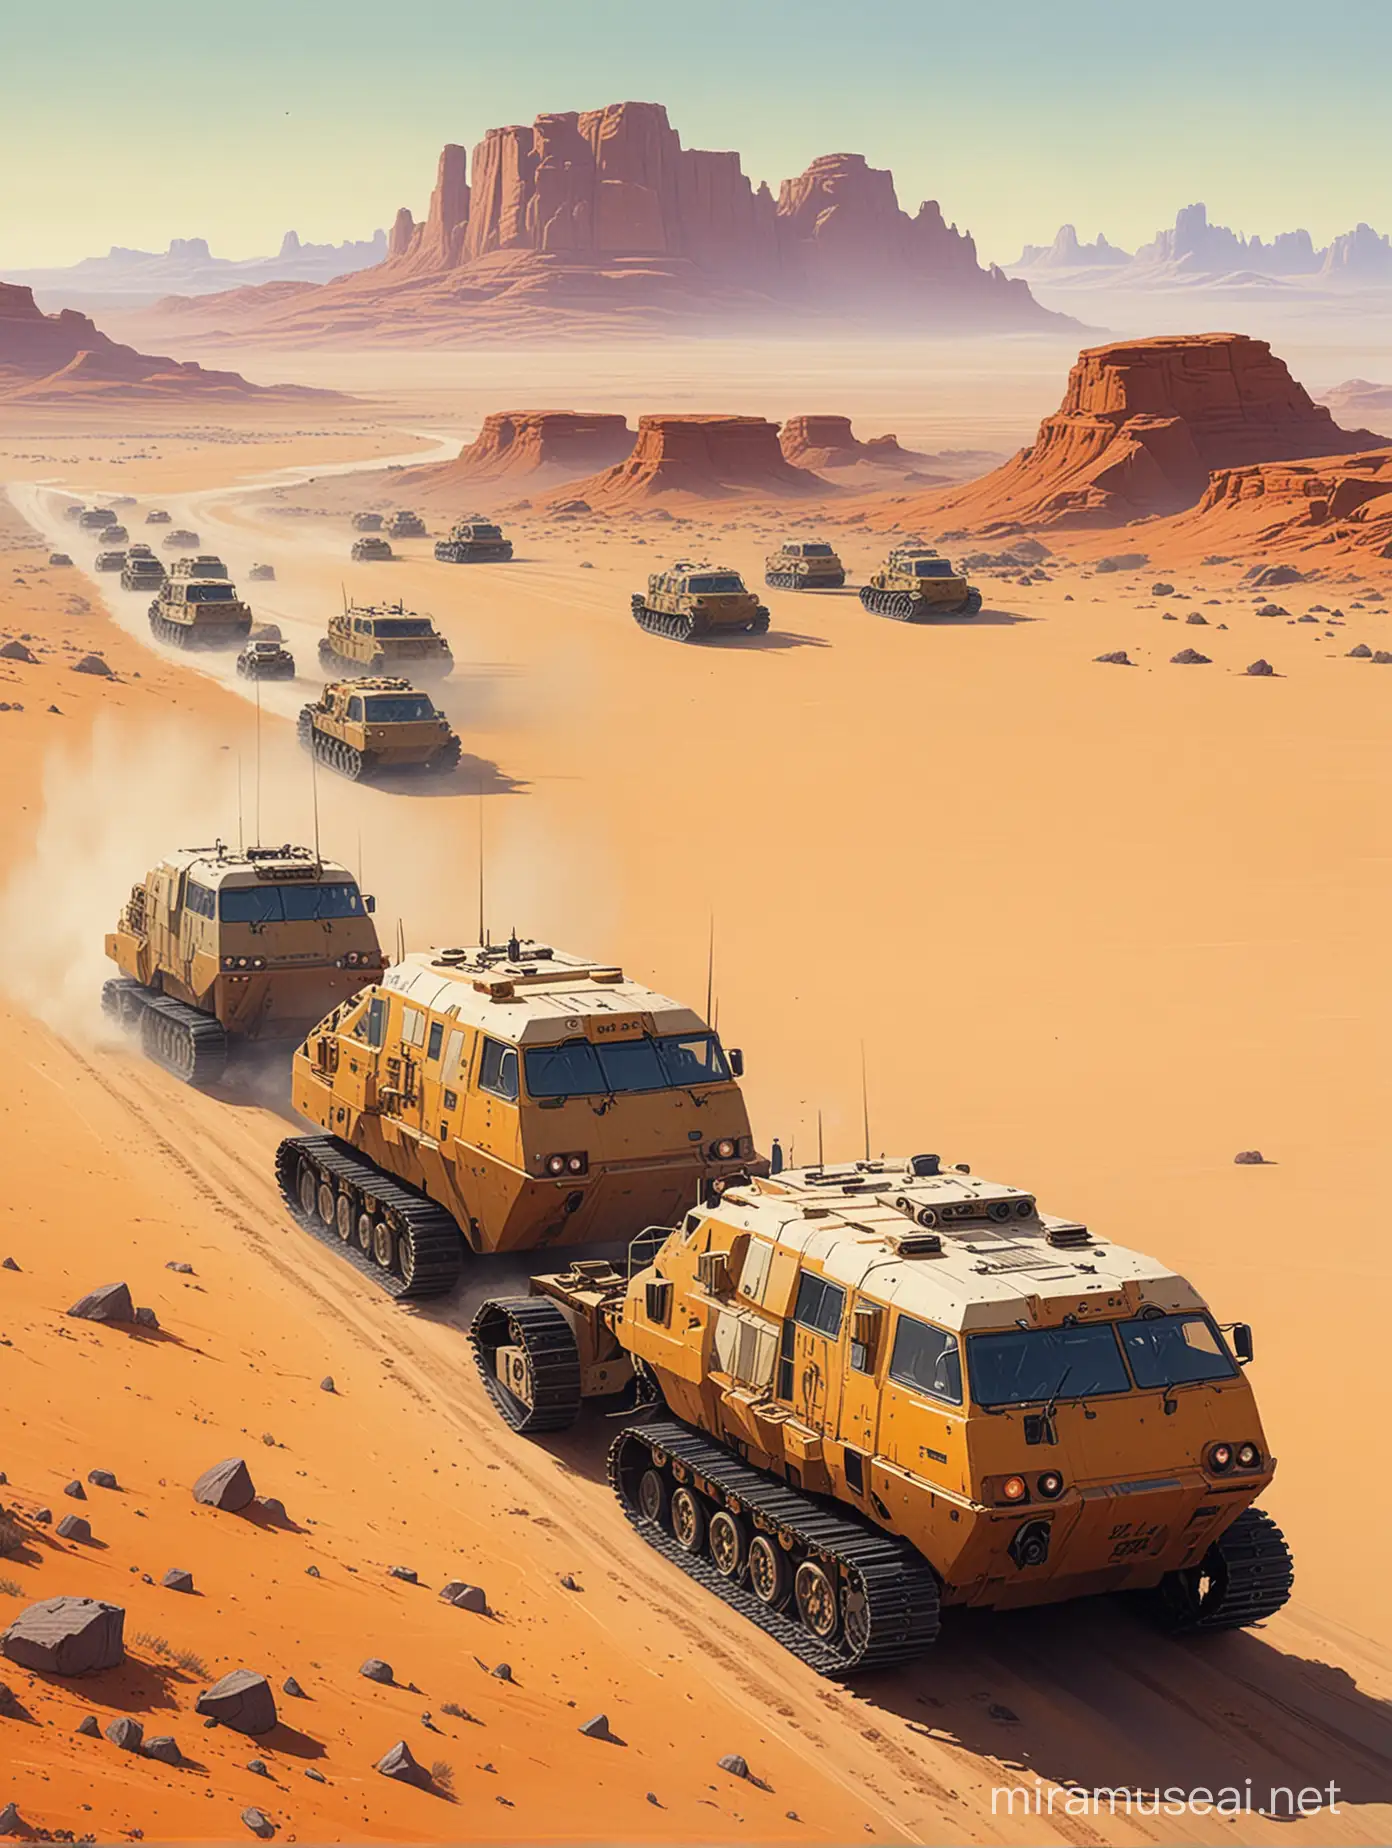 Colossal Tracked Vehicles Crossing Desert Landscape in Muted Pastel Tones